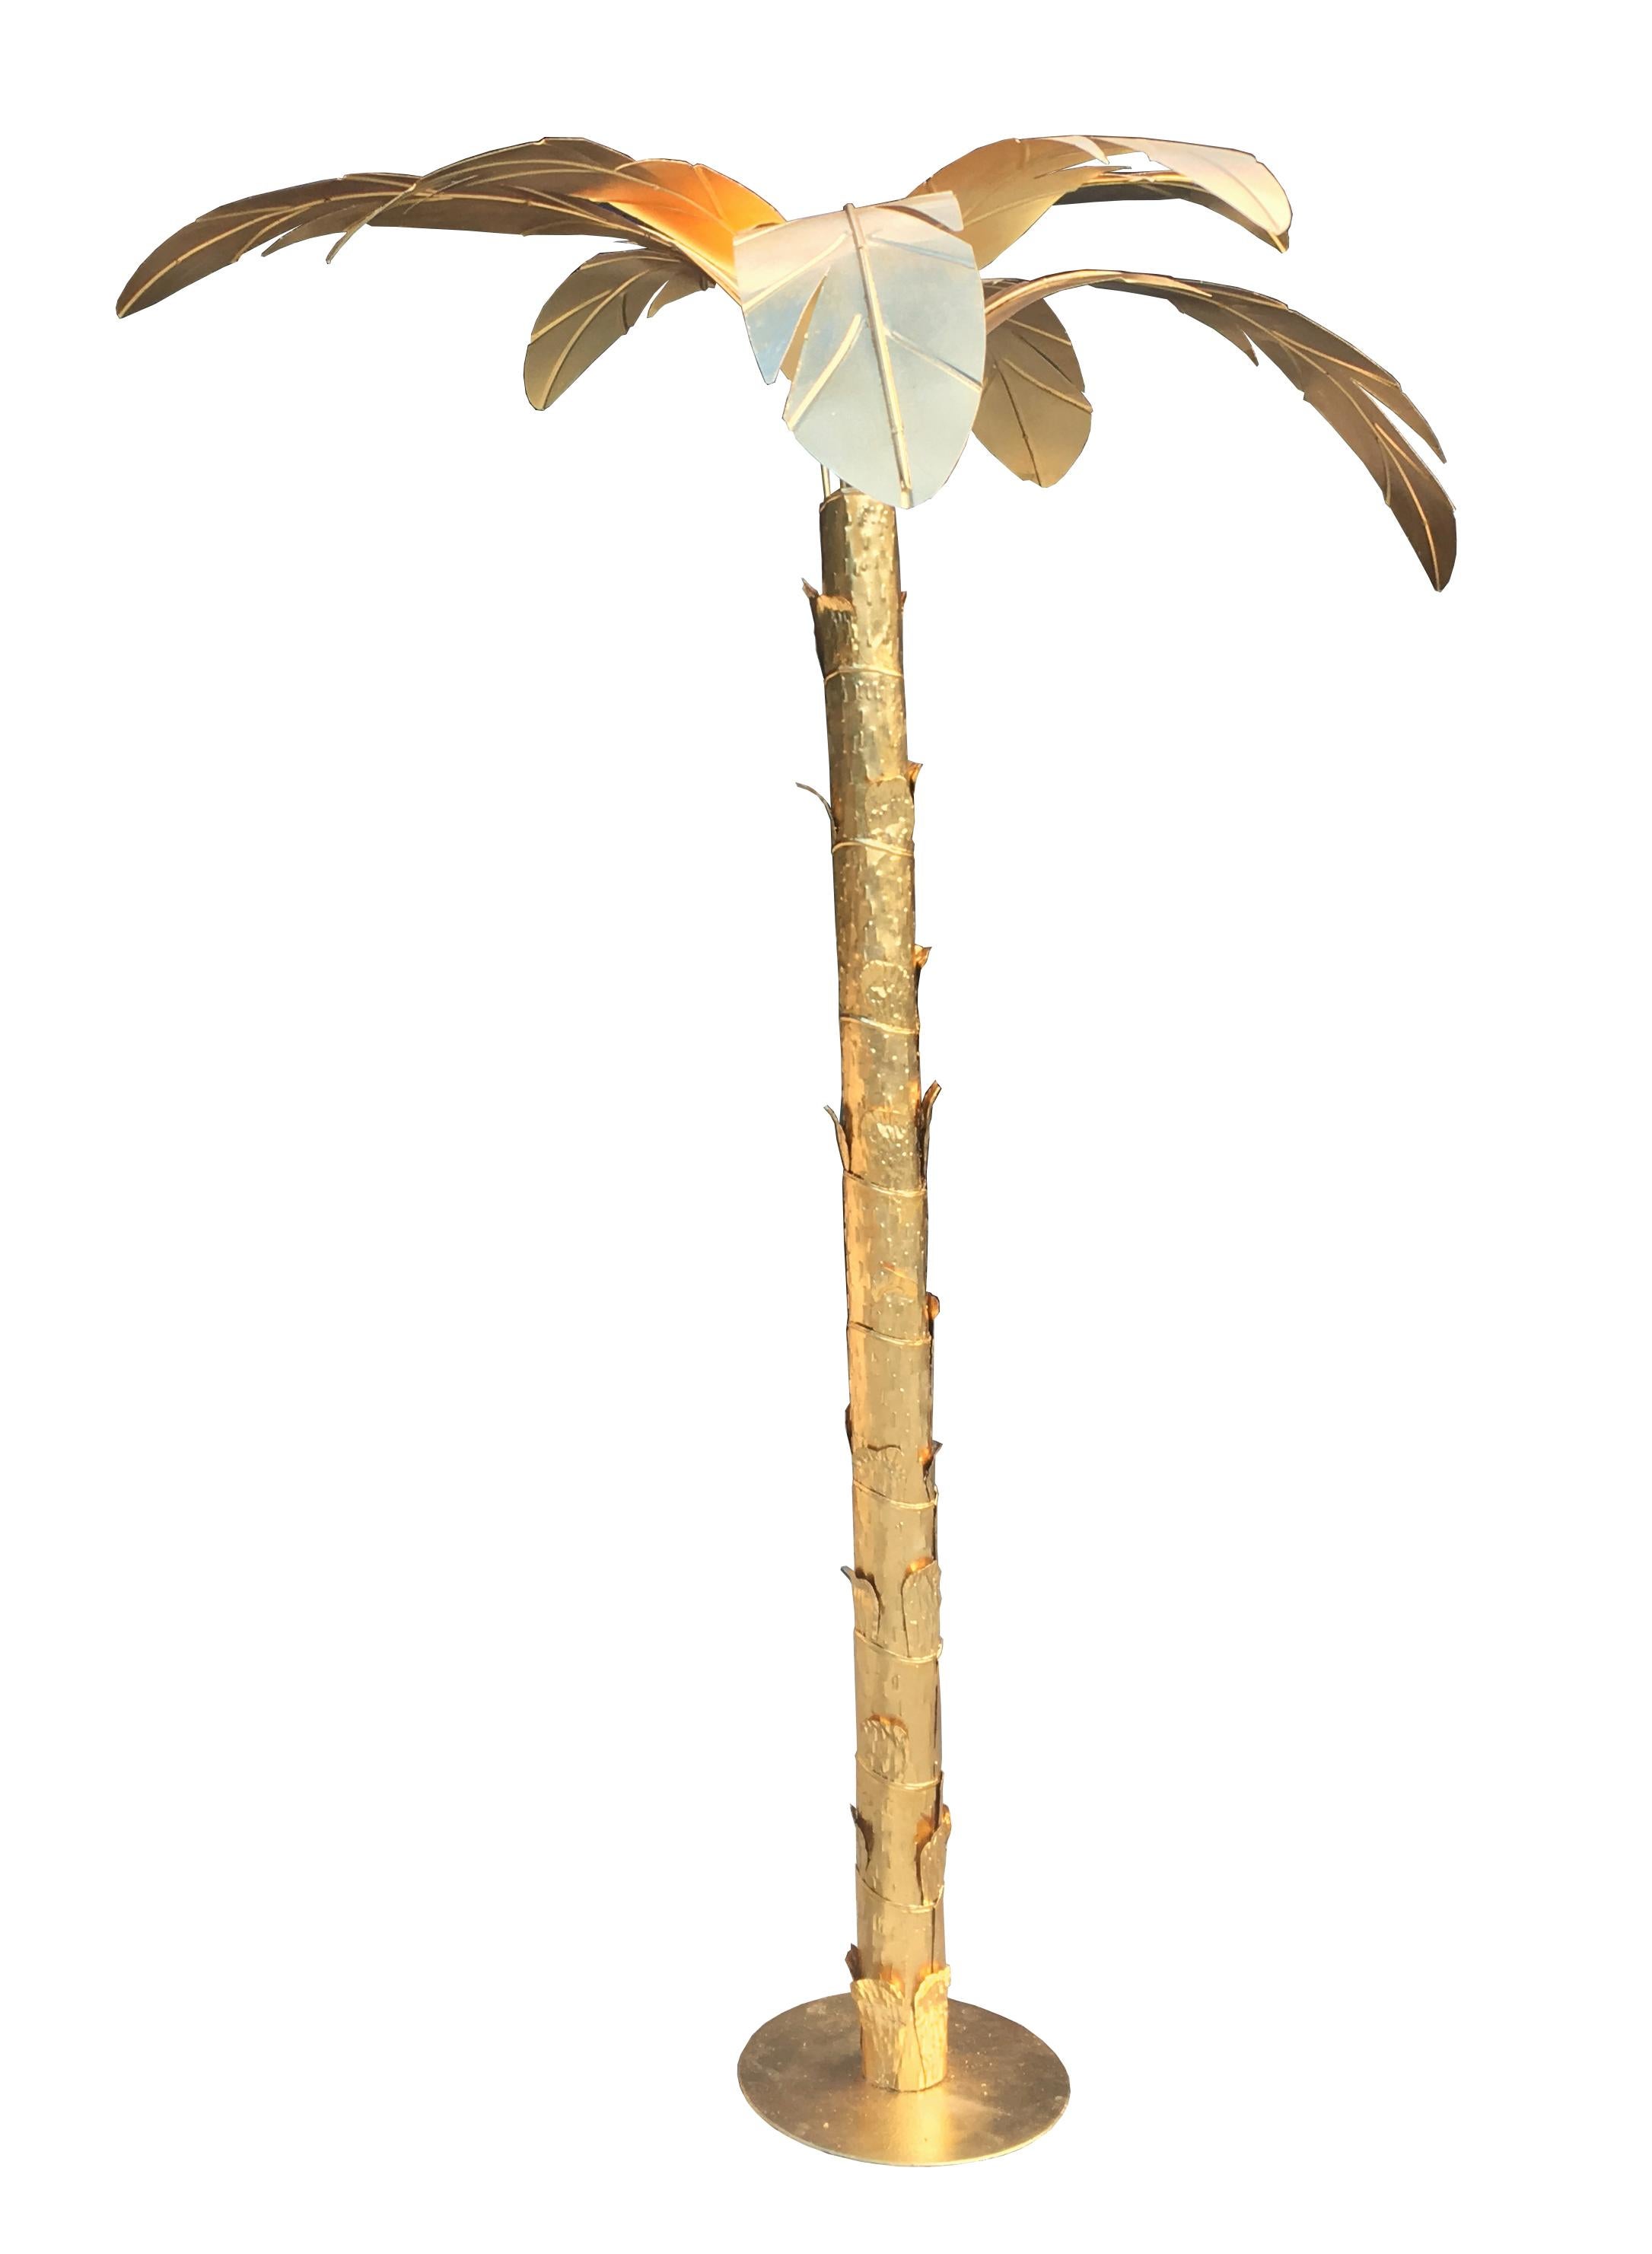 Palm tree or banana tree sculpture 1970s gold metal with gold leaf with 8 removable leaves.